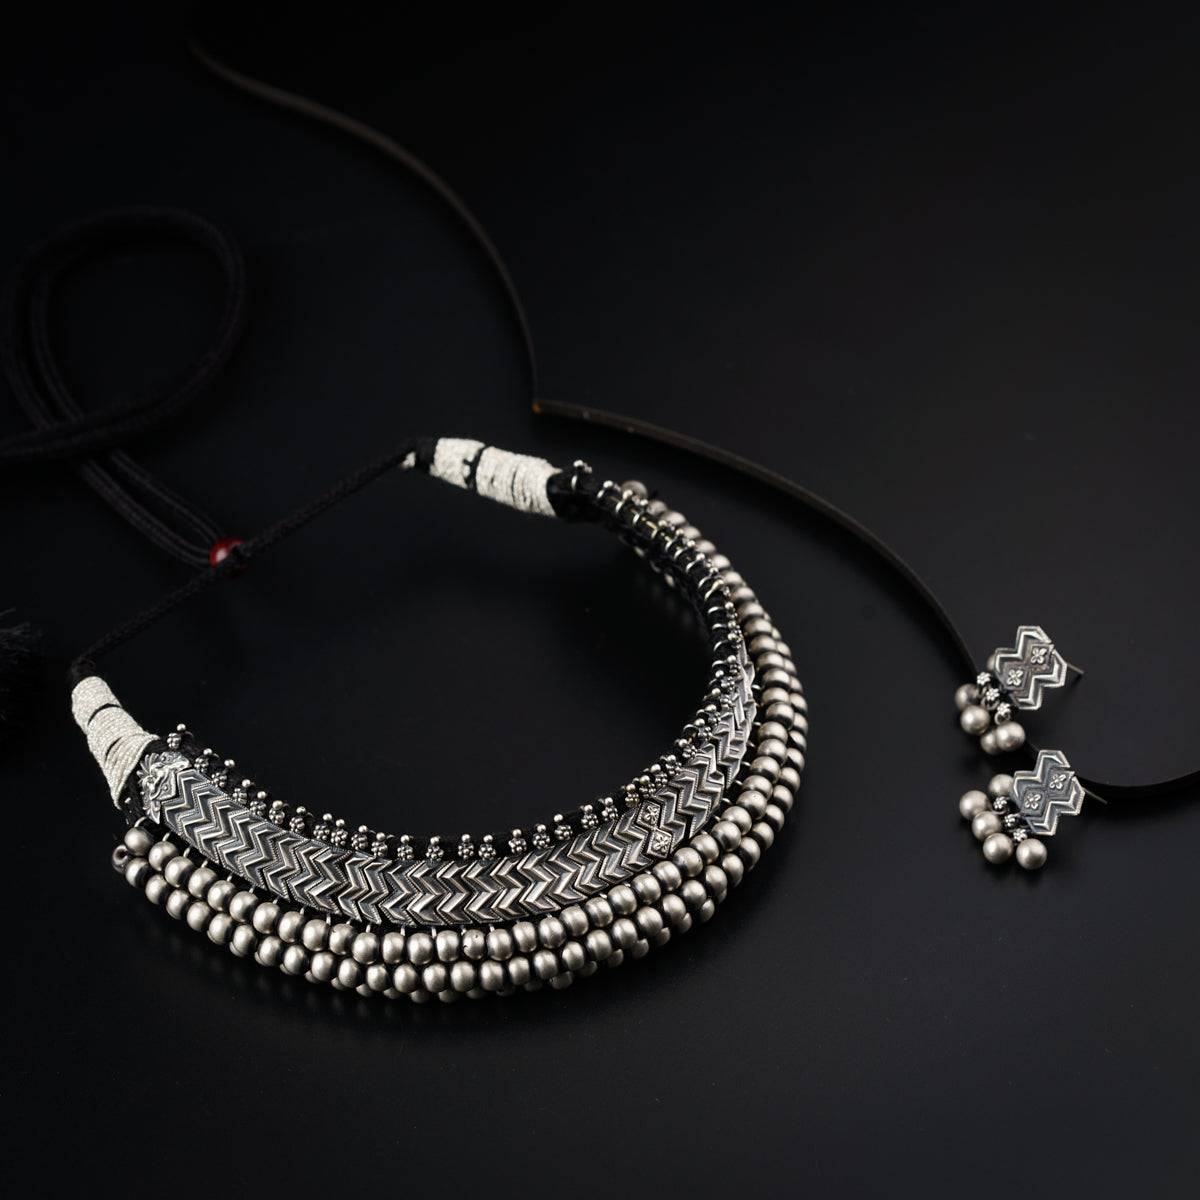 a black and white necklace and earring on a black surface